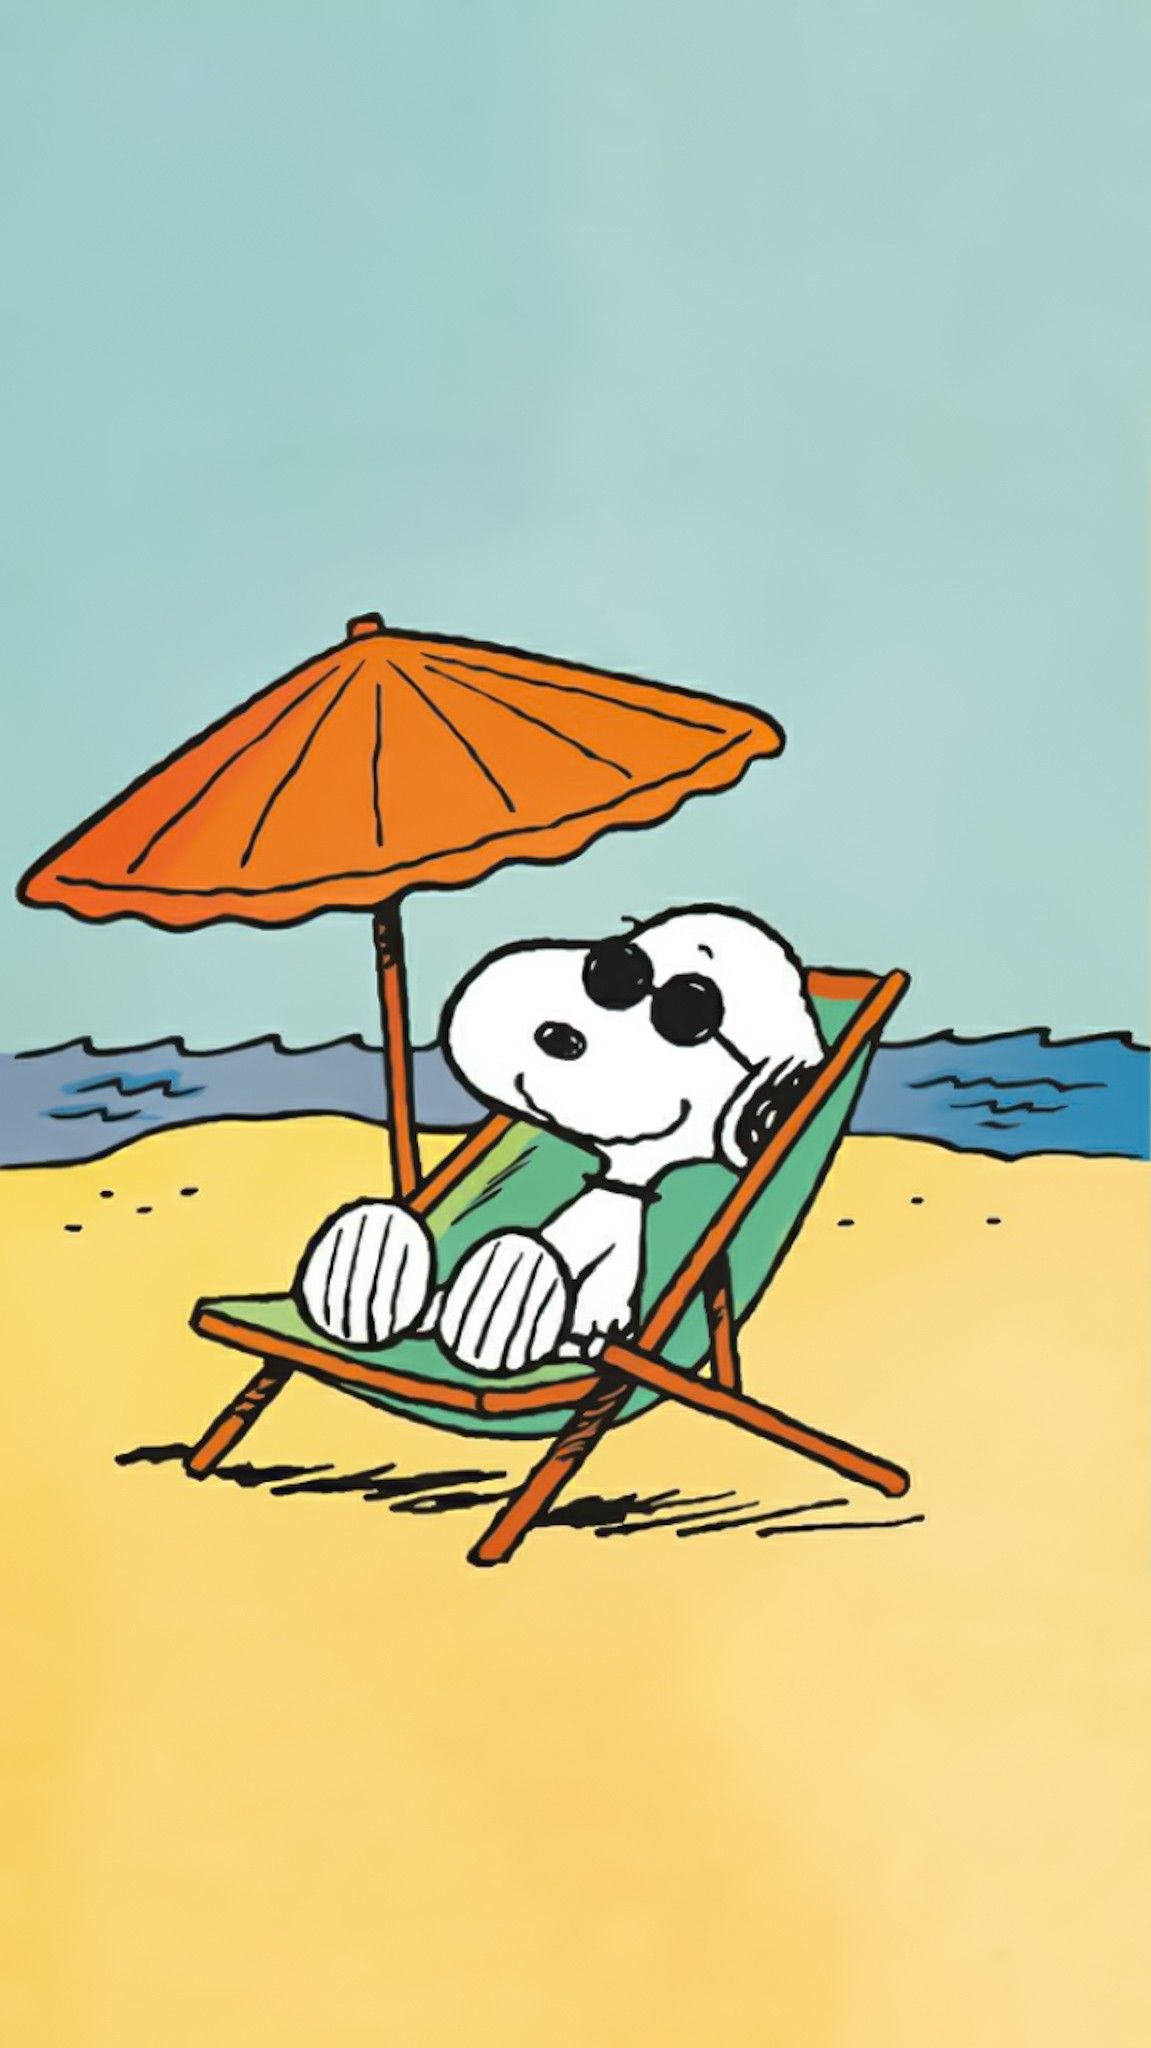 Snoopy. Snoopy wallpaper, Snoopy, Snoopy picture